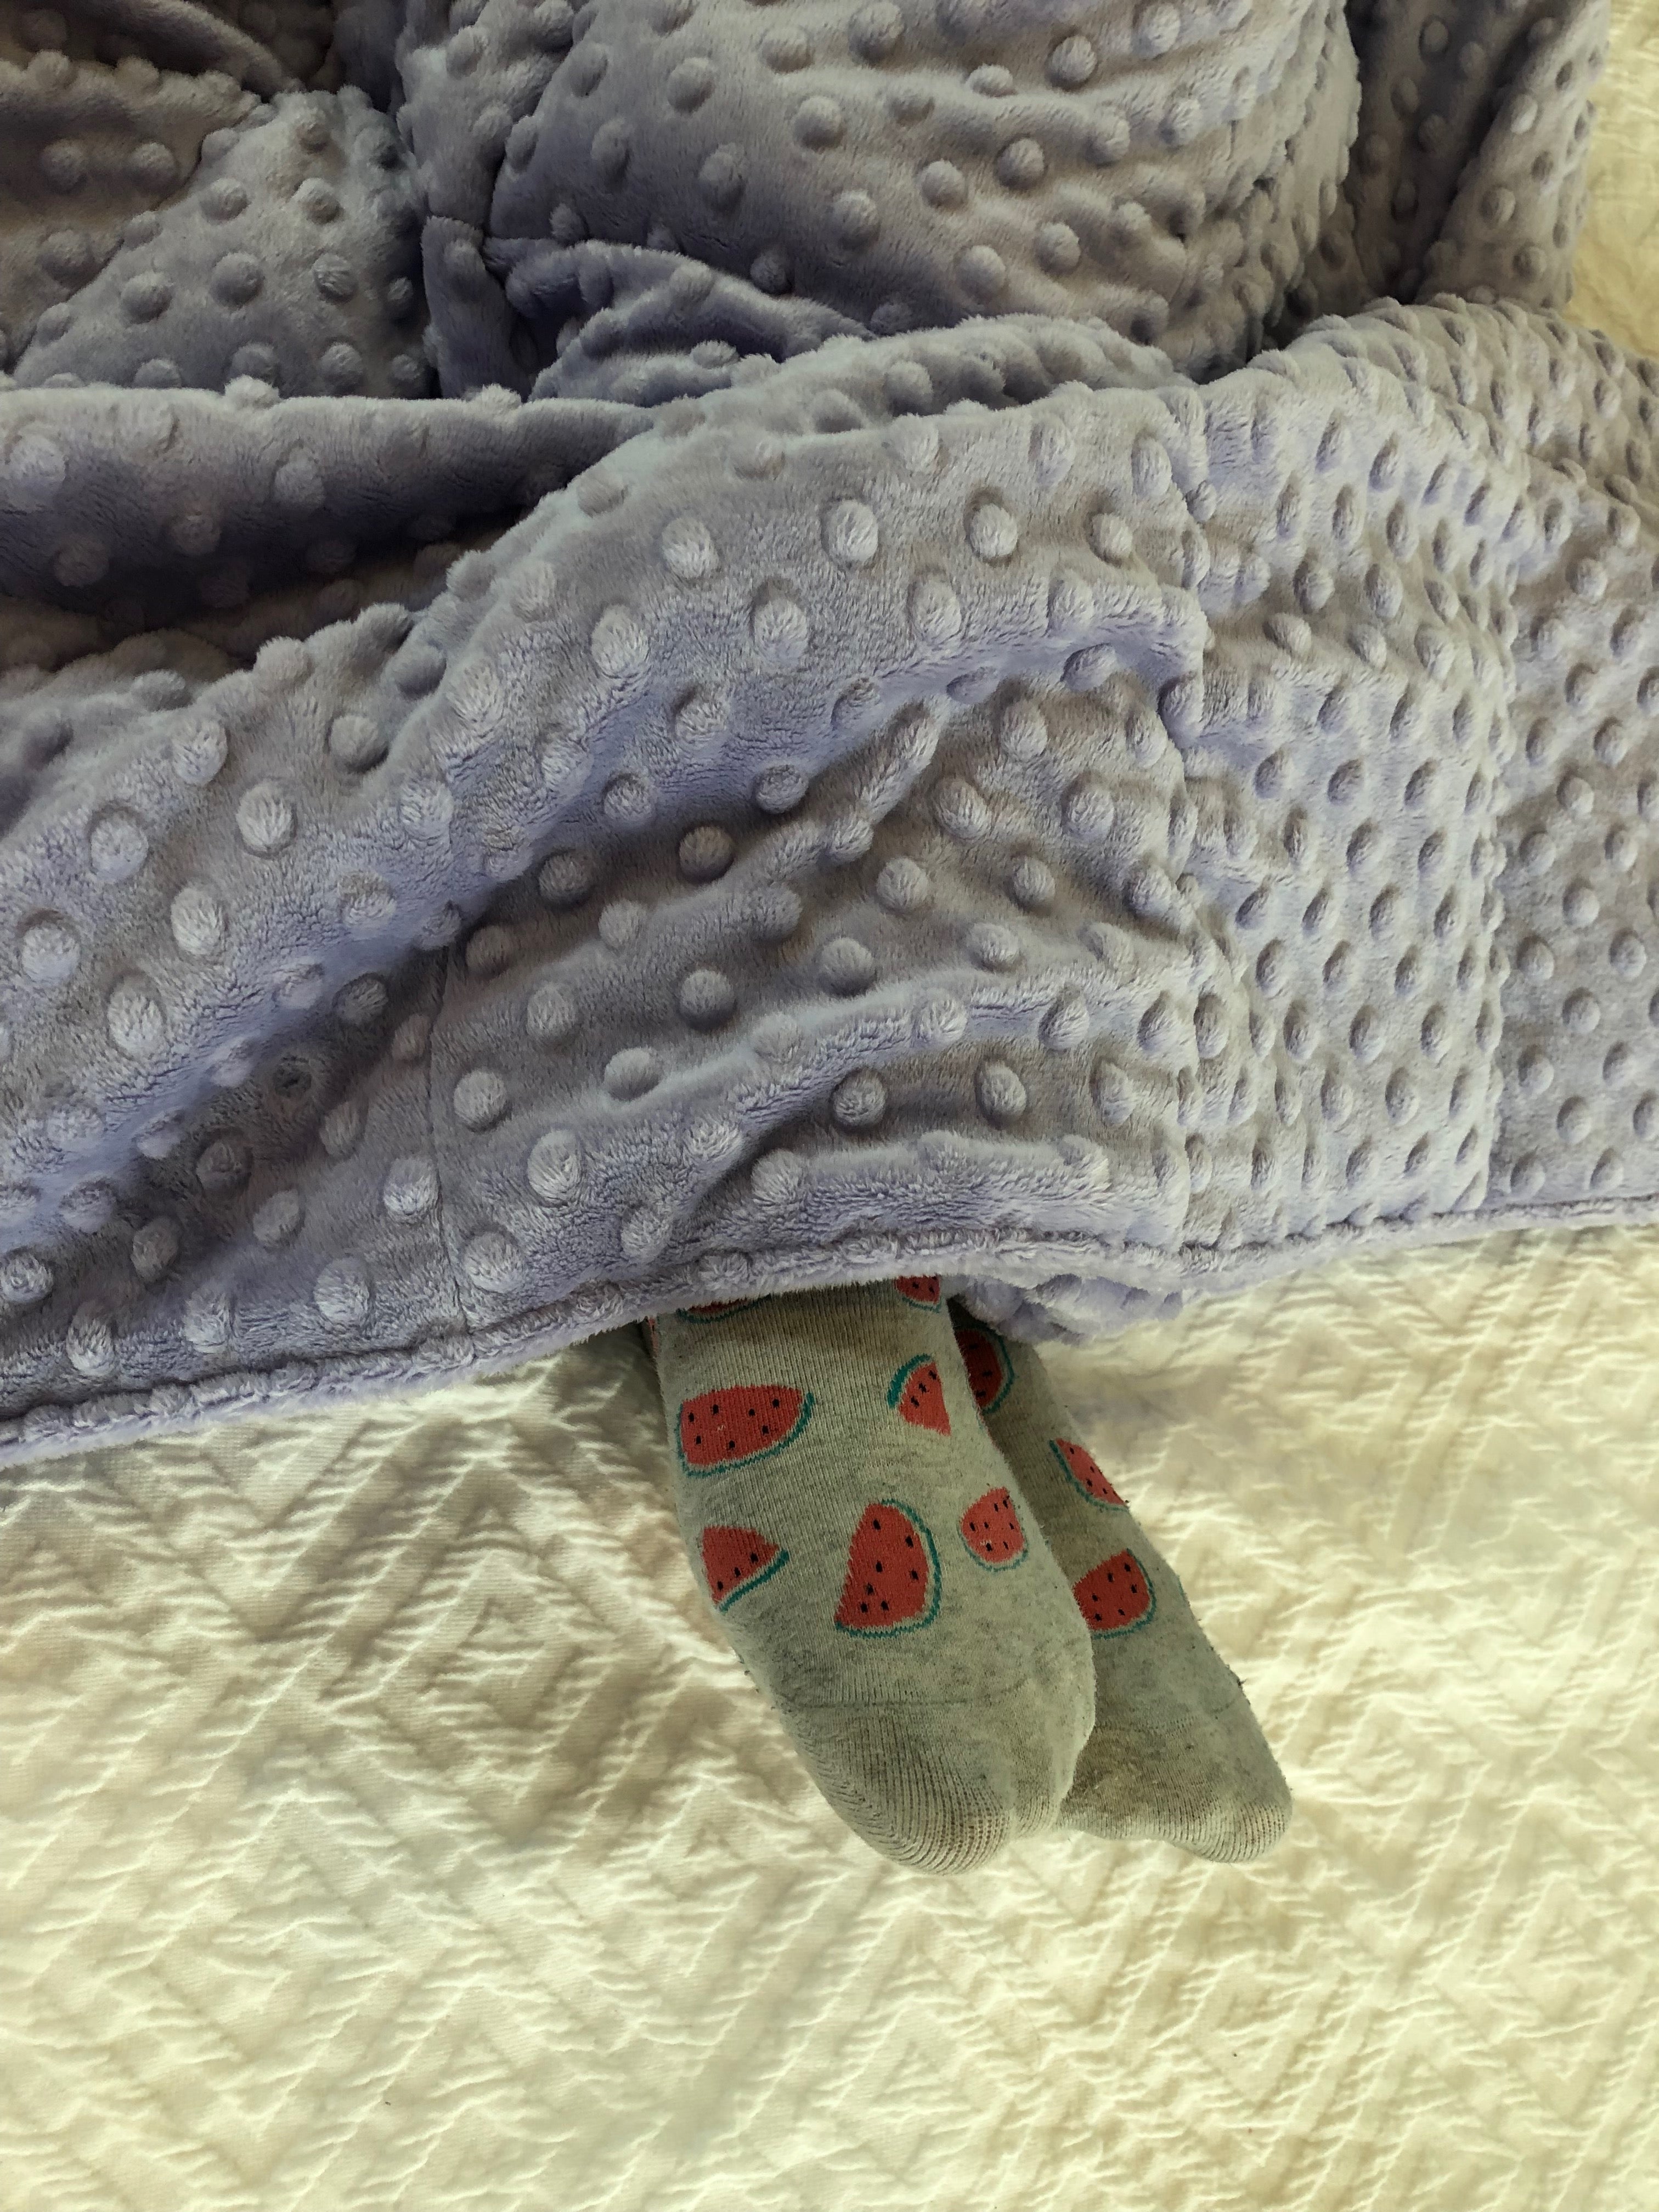 Can Weighted Blankets Help with Restless Leg Syndrome?